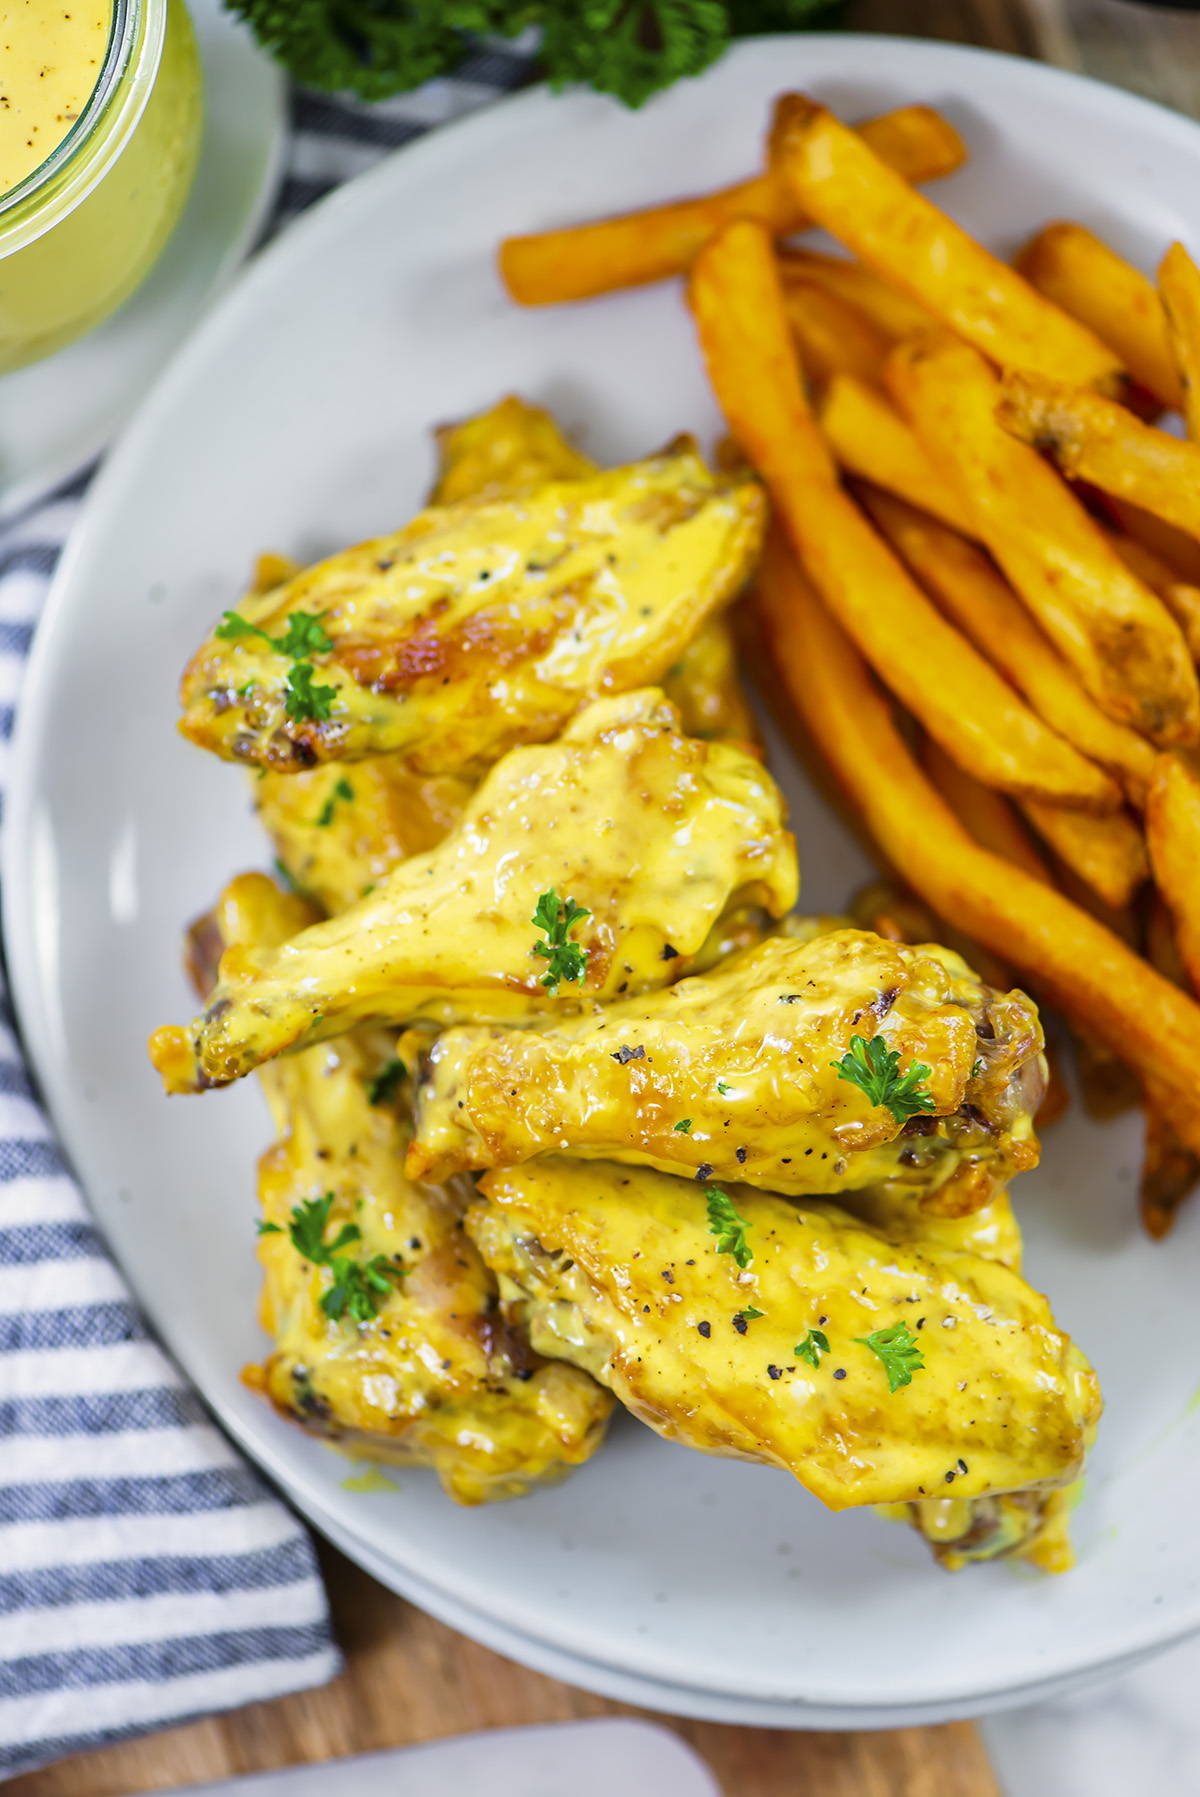 Overhead view of honey mustard wings on a plate with fries.